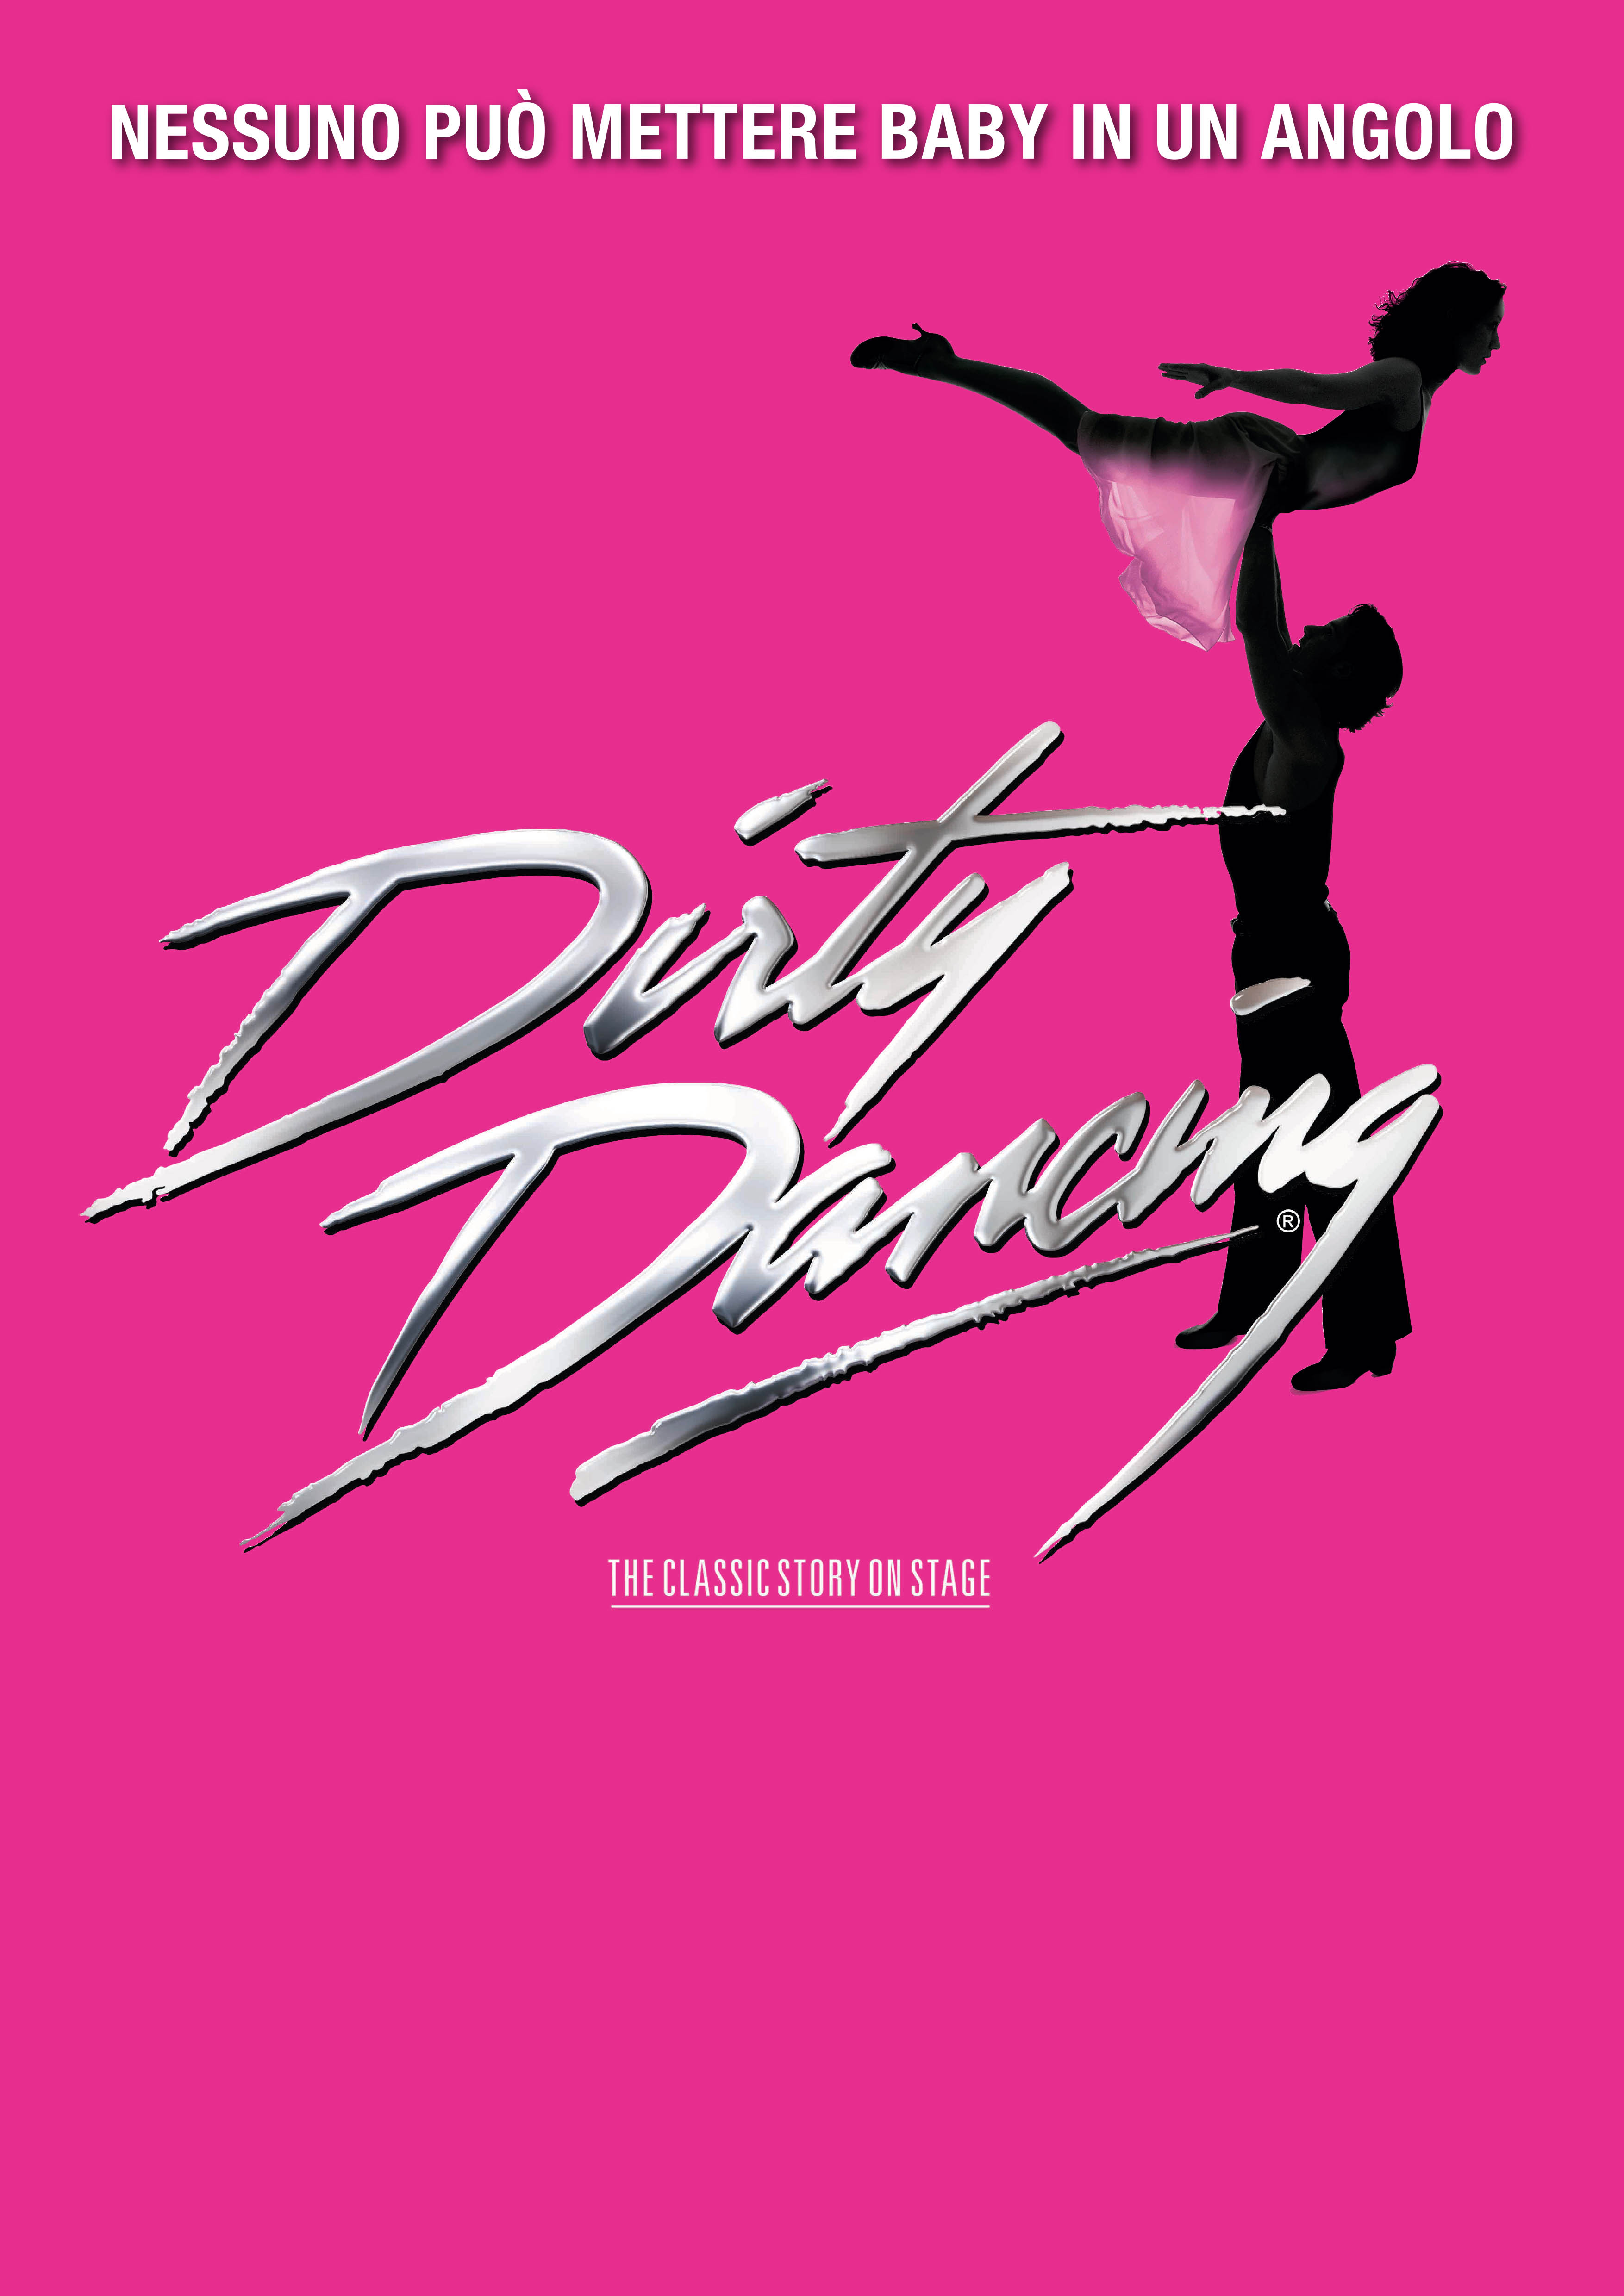 DIRTY DANCING Il musical